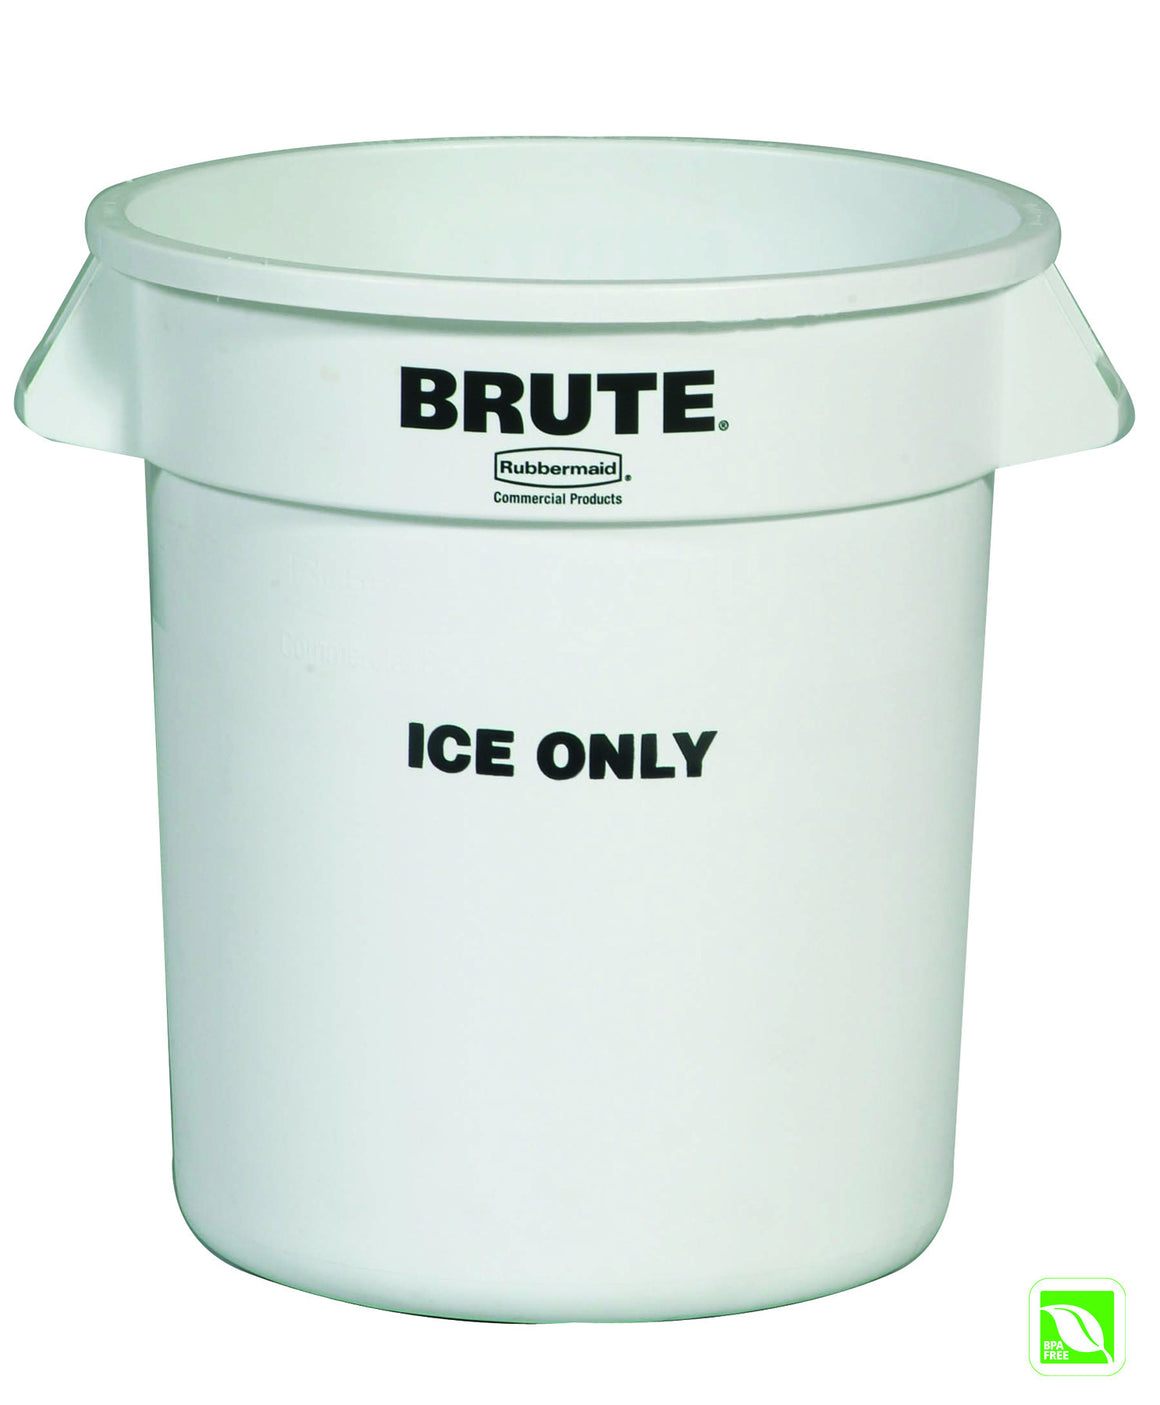 BRUTE ICE ONLY CONTAINER 10 gal W/O LID WHITE